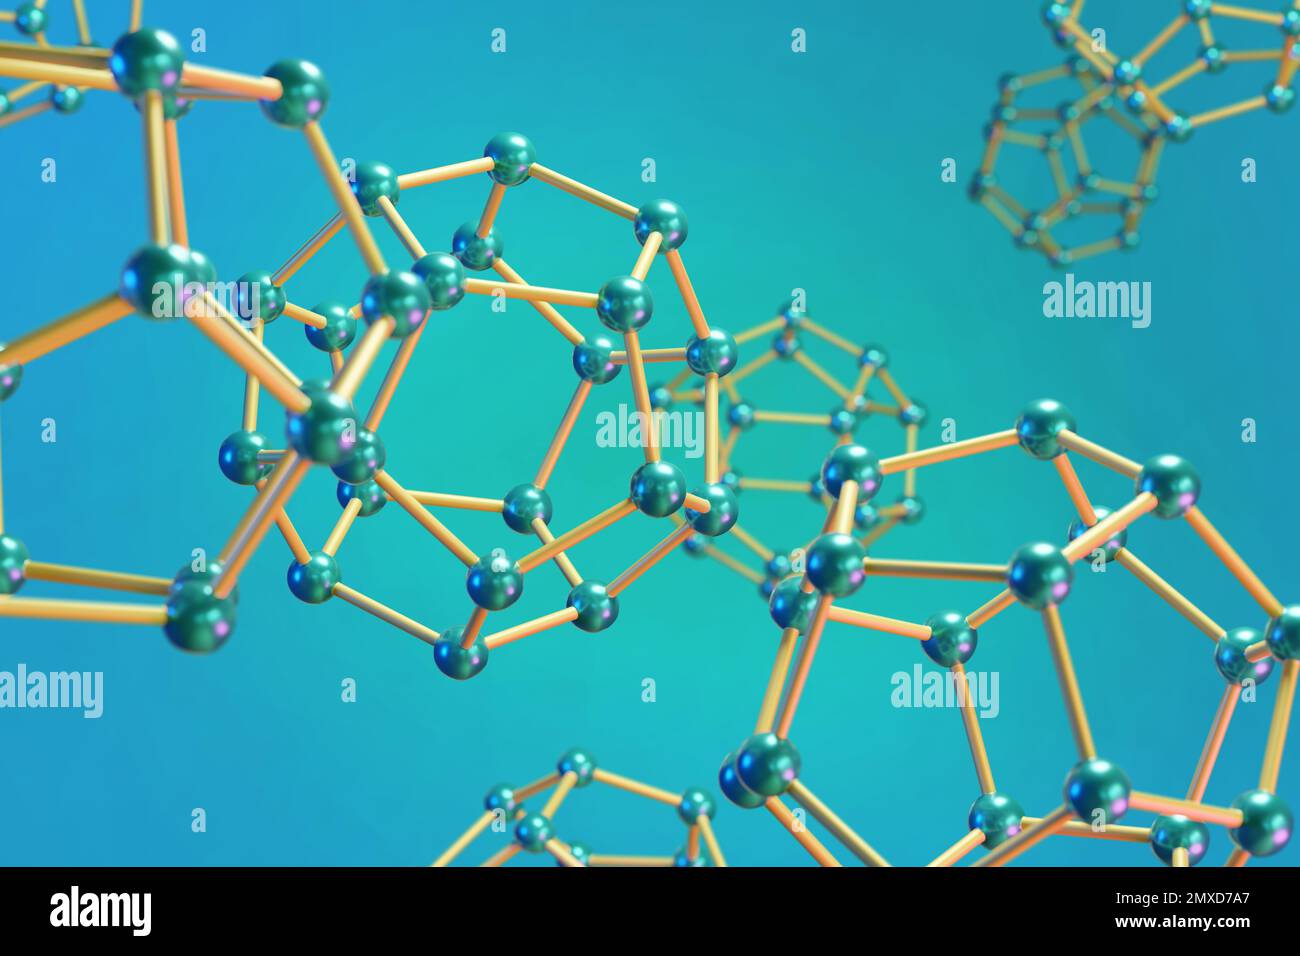 Molecules in the form of a dodecahedron on blue background. 3d illustration. Stock Photo